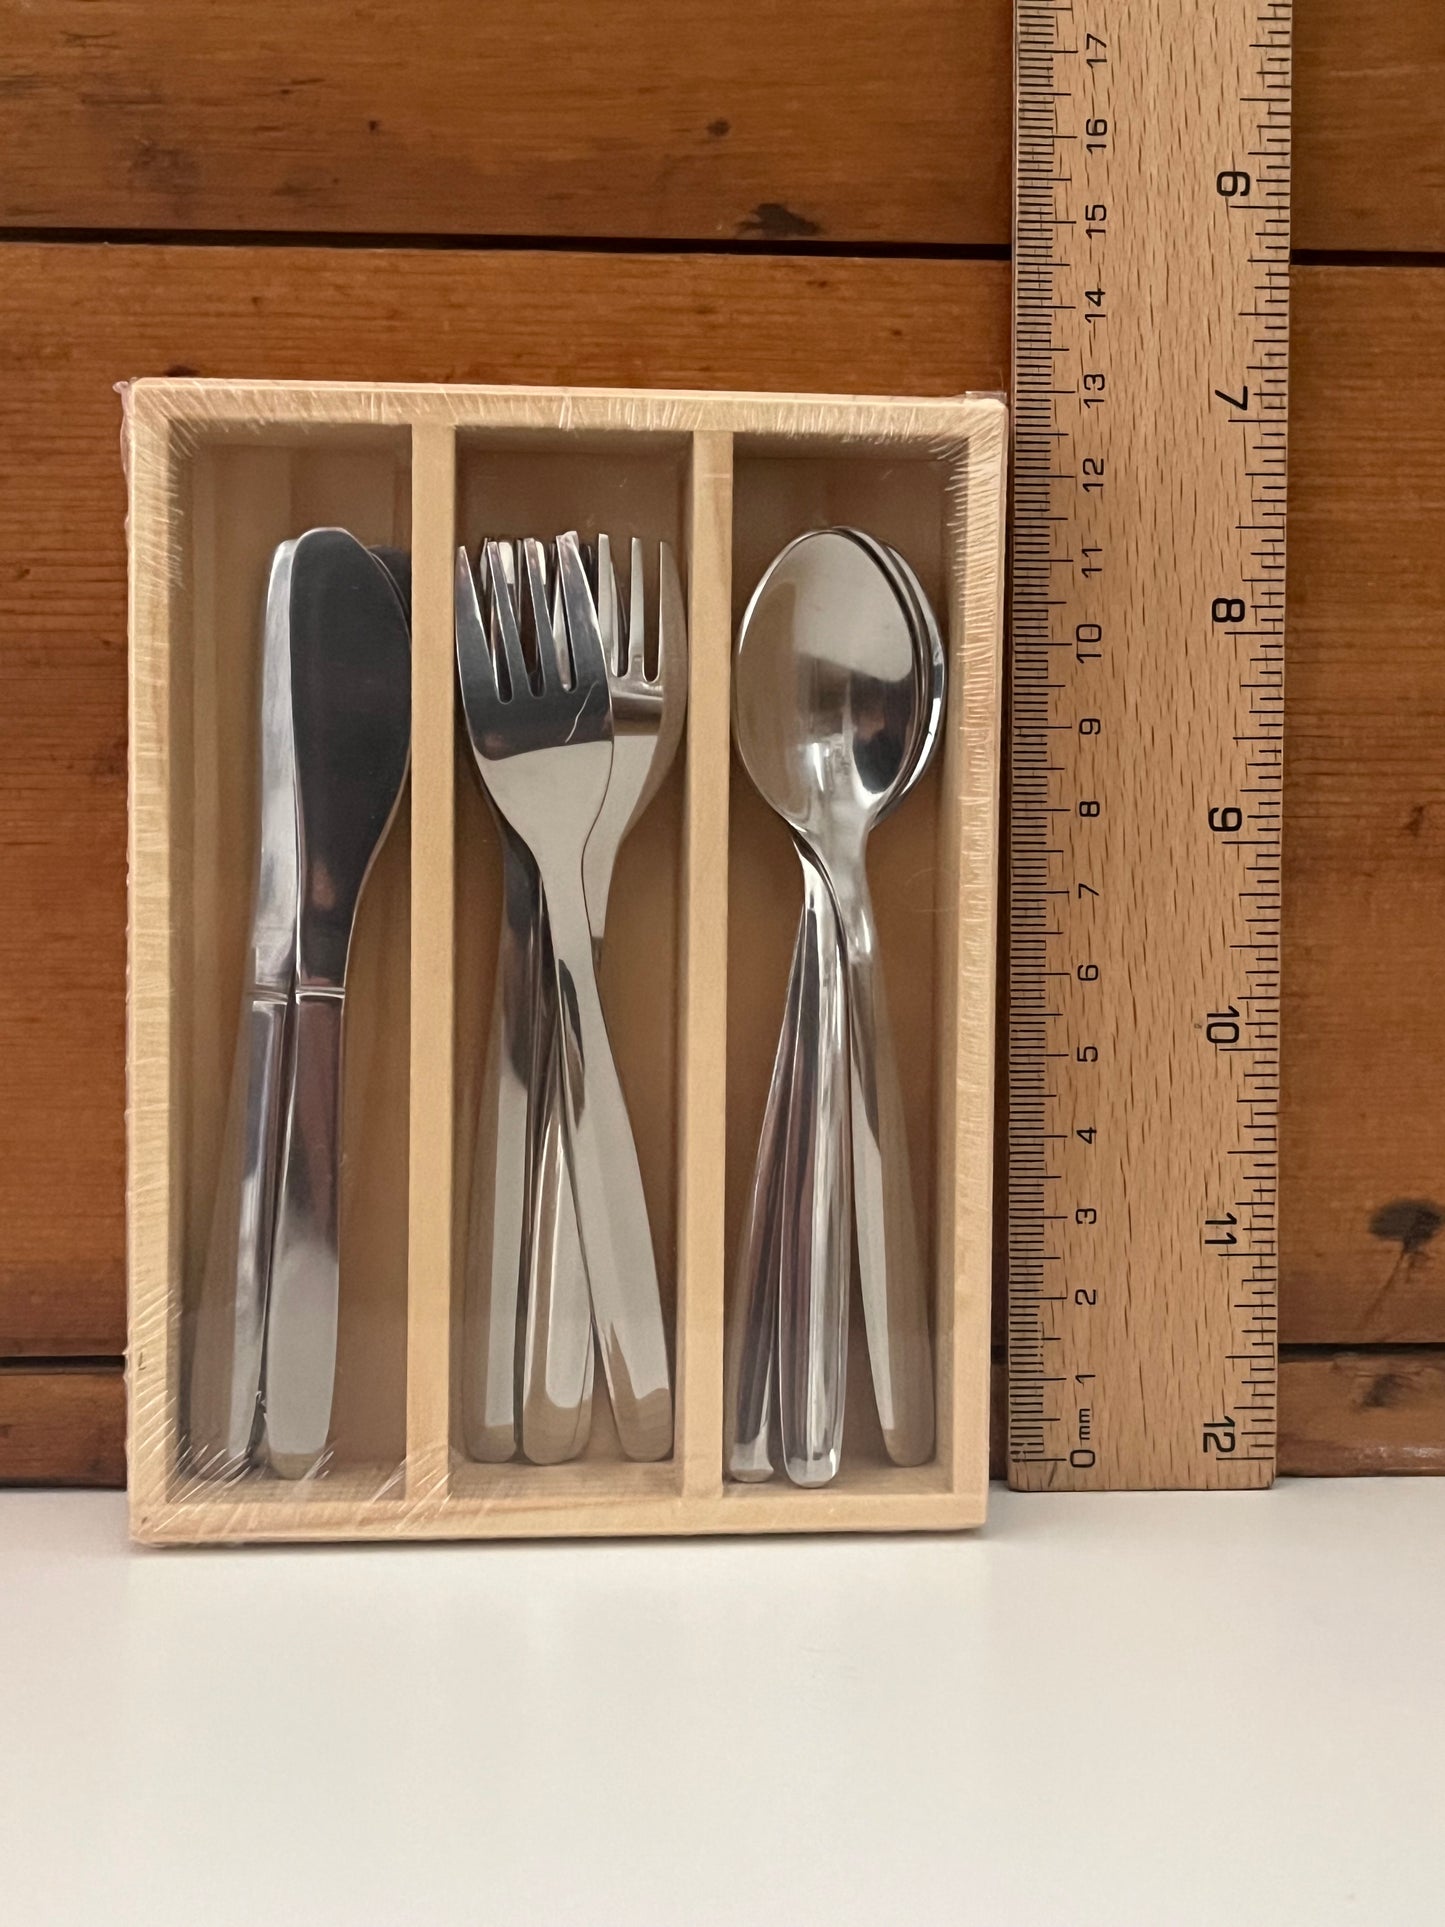 Keeping House - Child's CUTLERY SET (12 pieces)